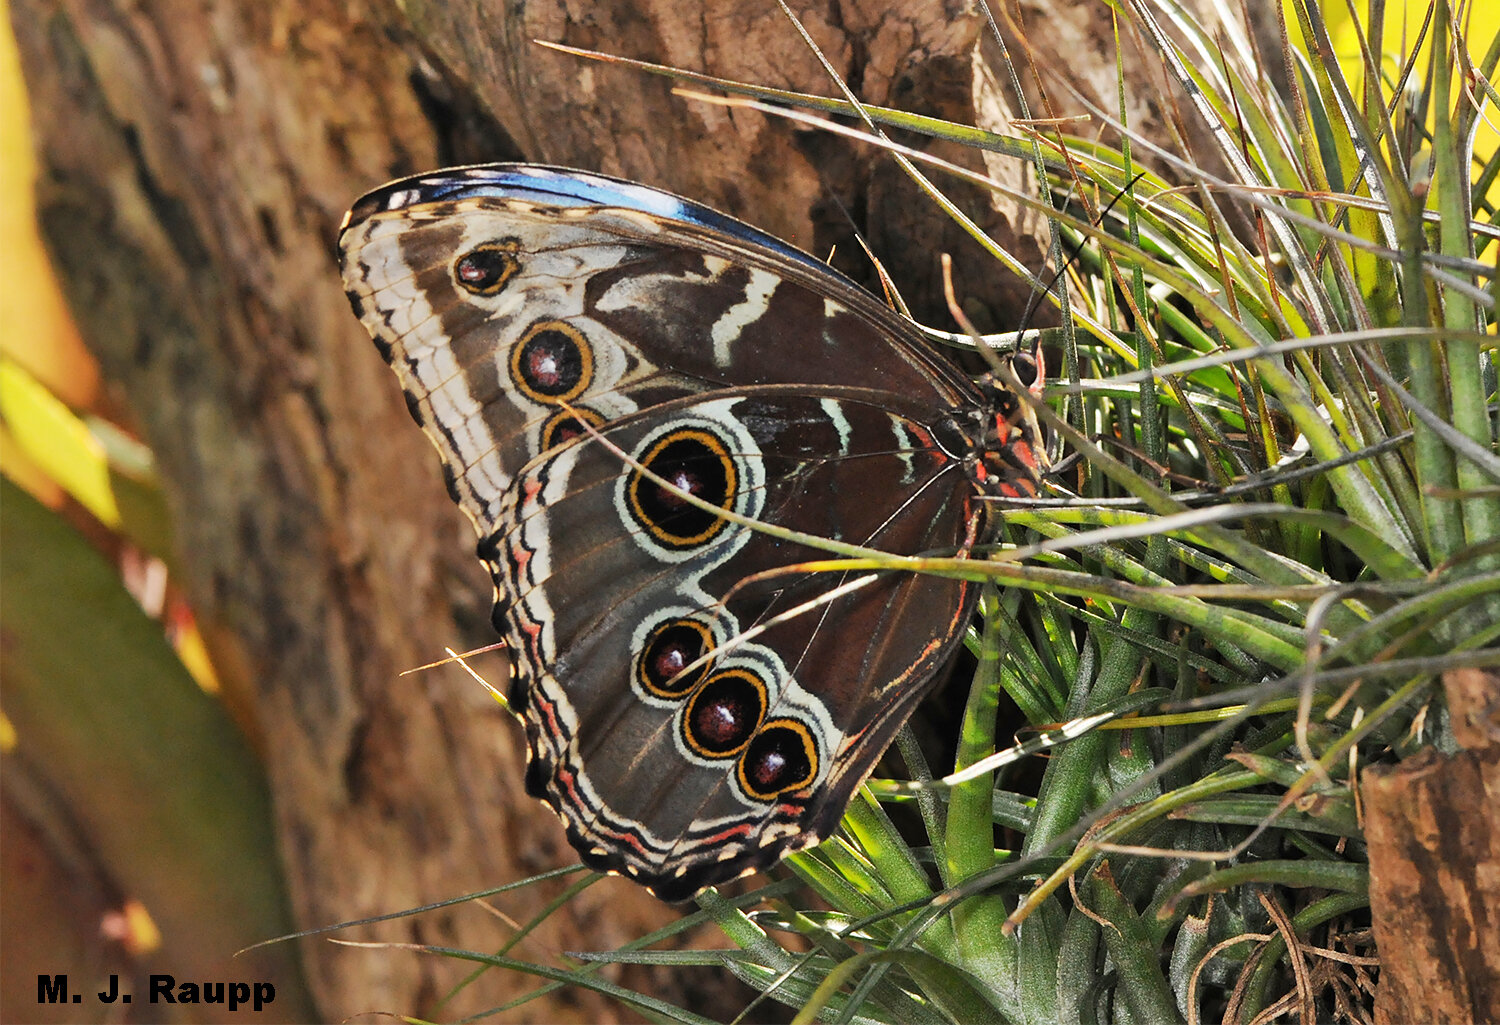 Butterfly of the Week - The Blue Morpho